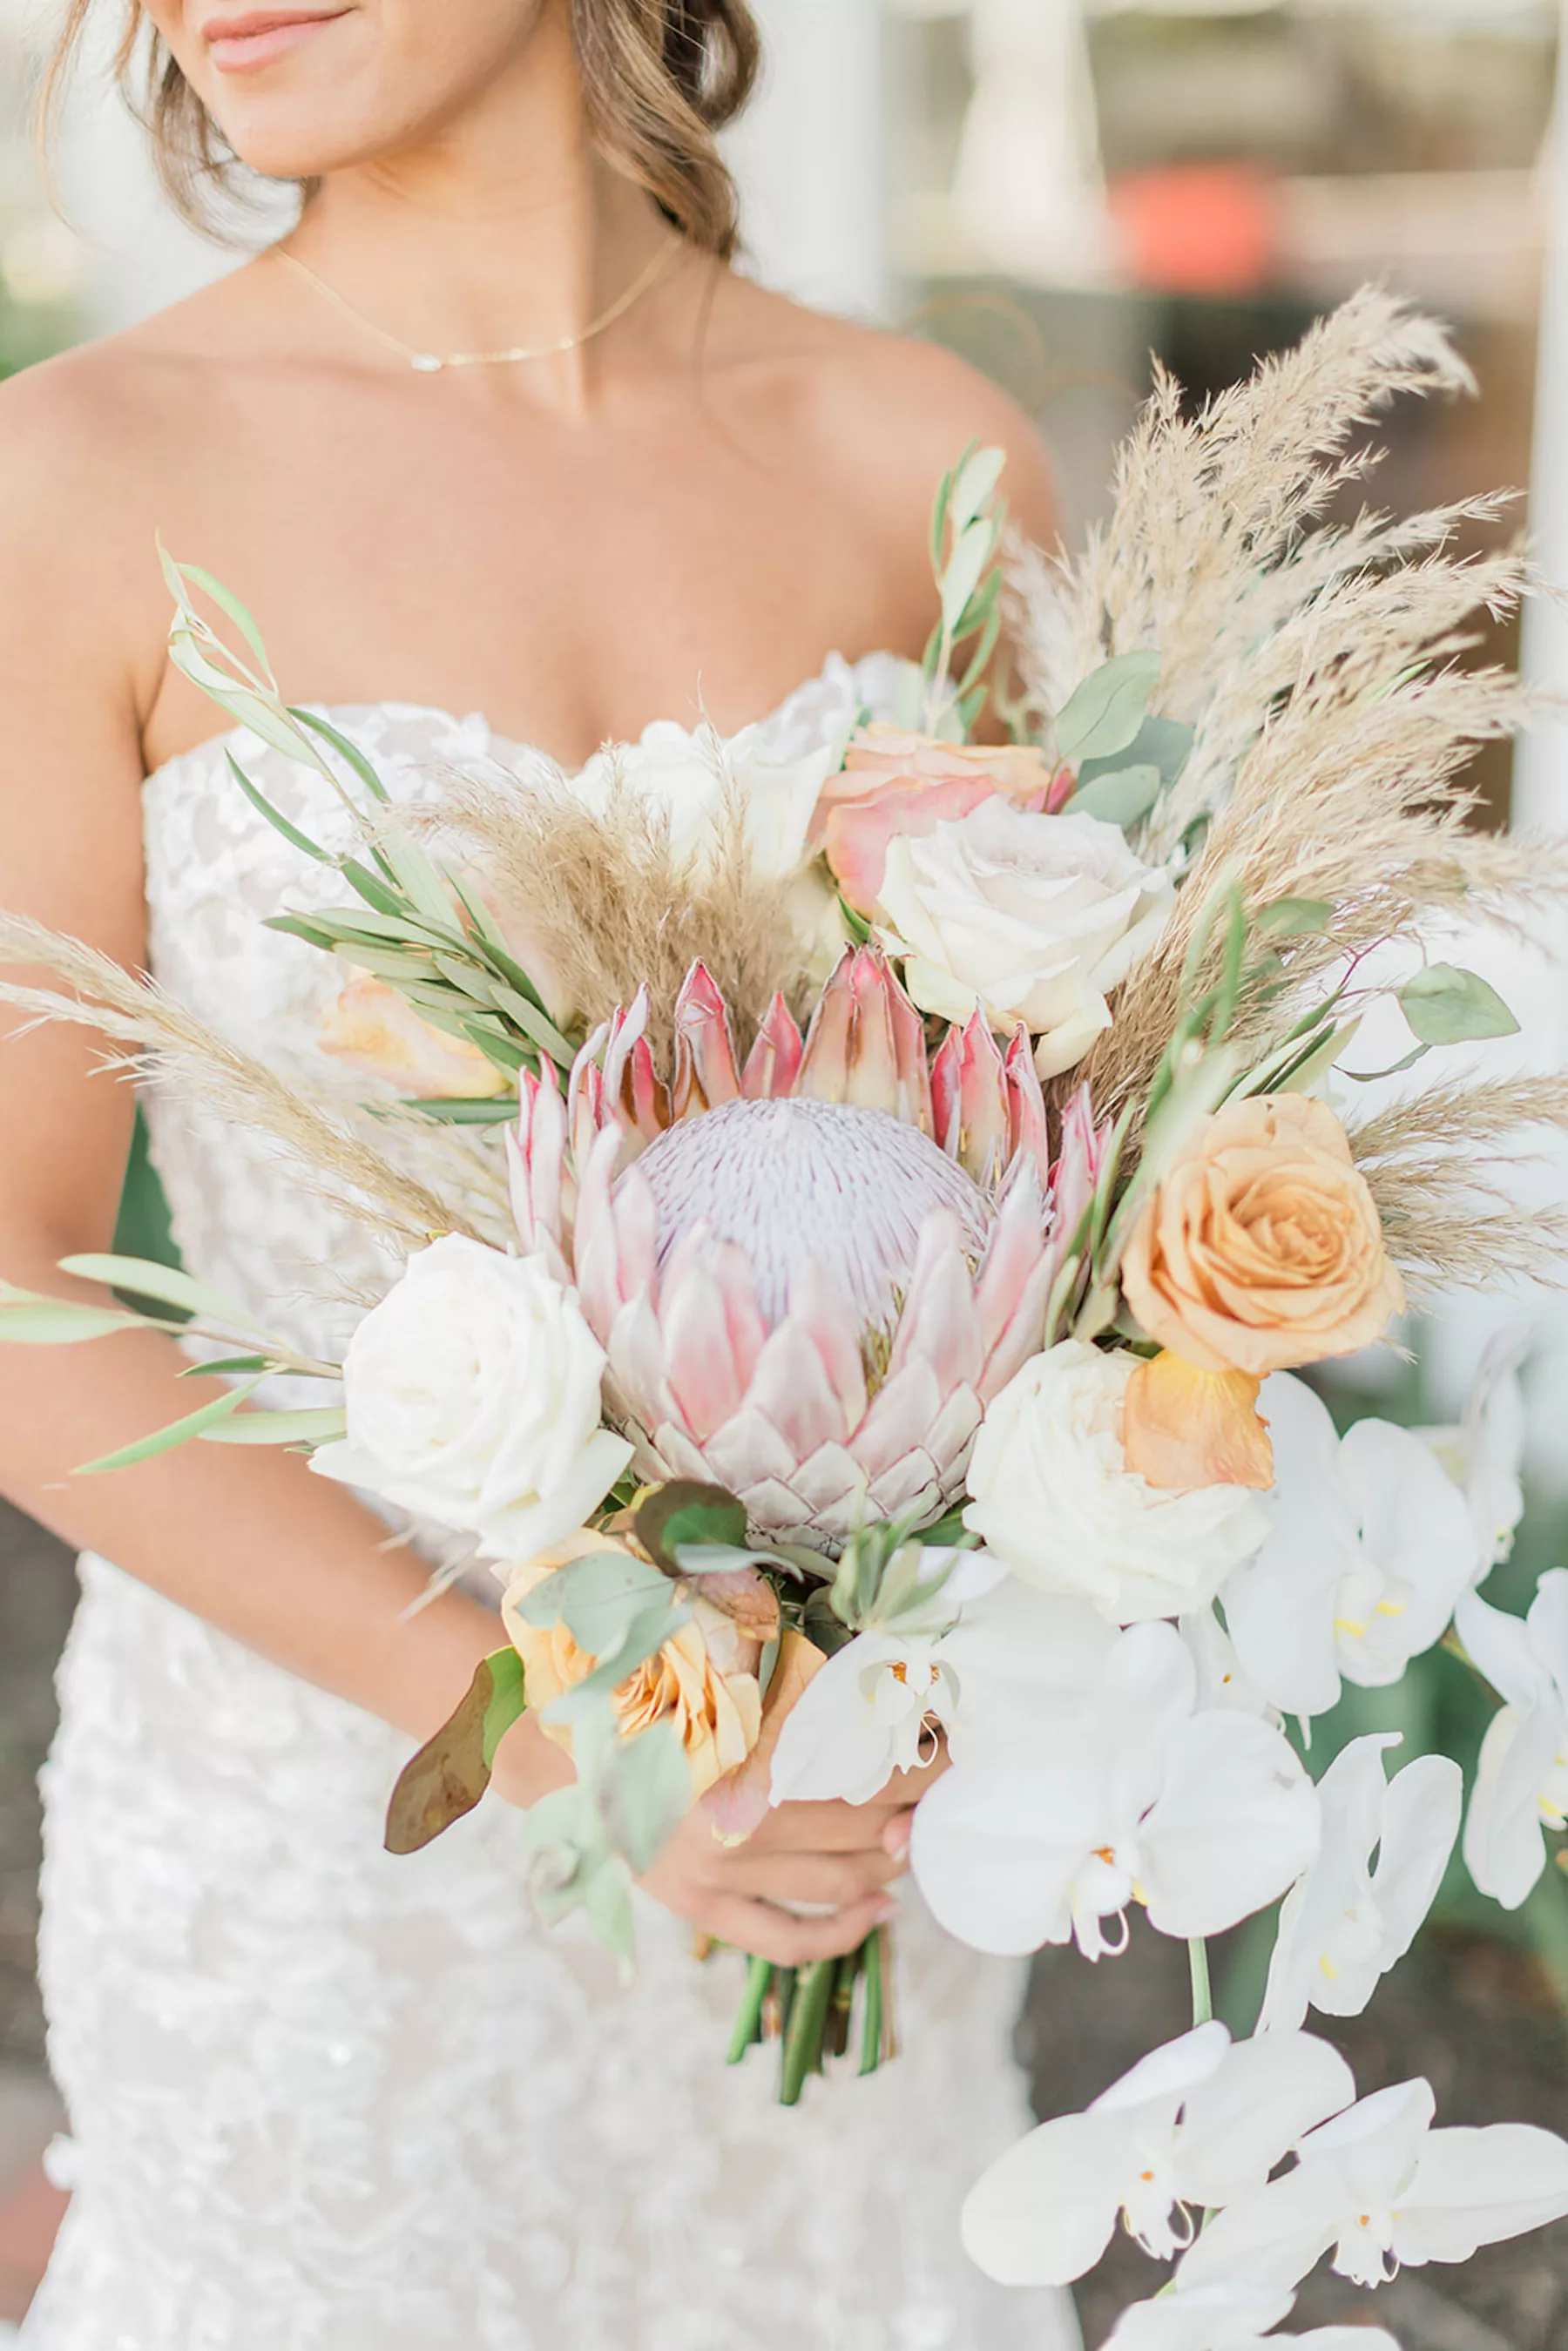 Boho Fall Wedding Bouquet Ideas with Pampas Grass, White and Orange Roses, Pink King Protea, Orchids, and Eucalyptus